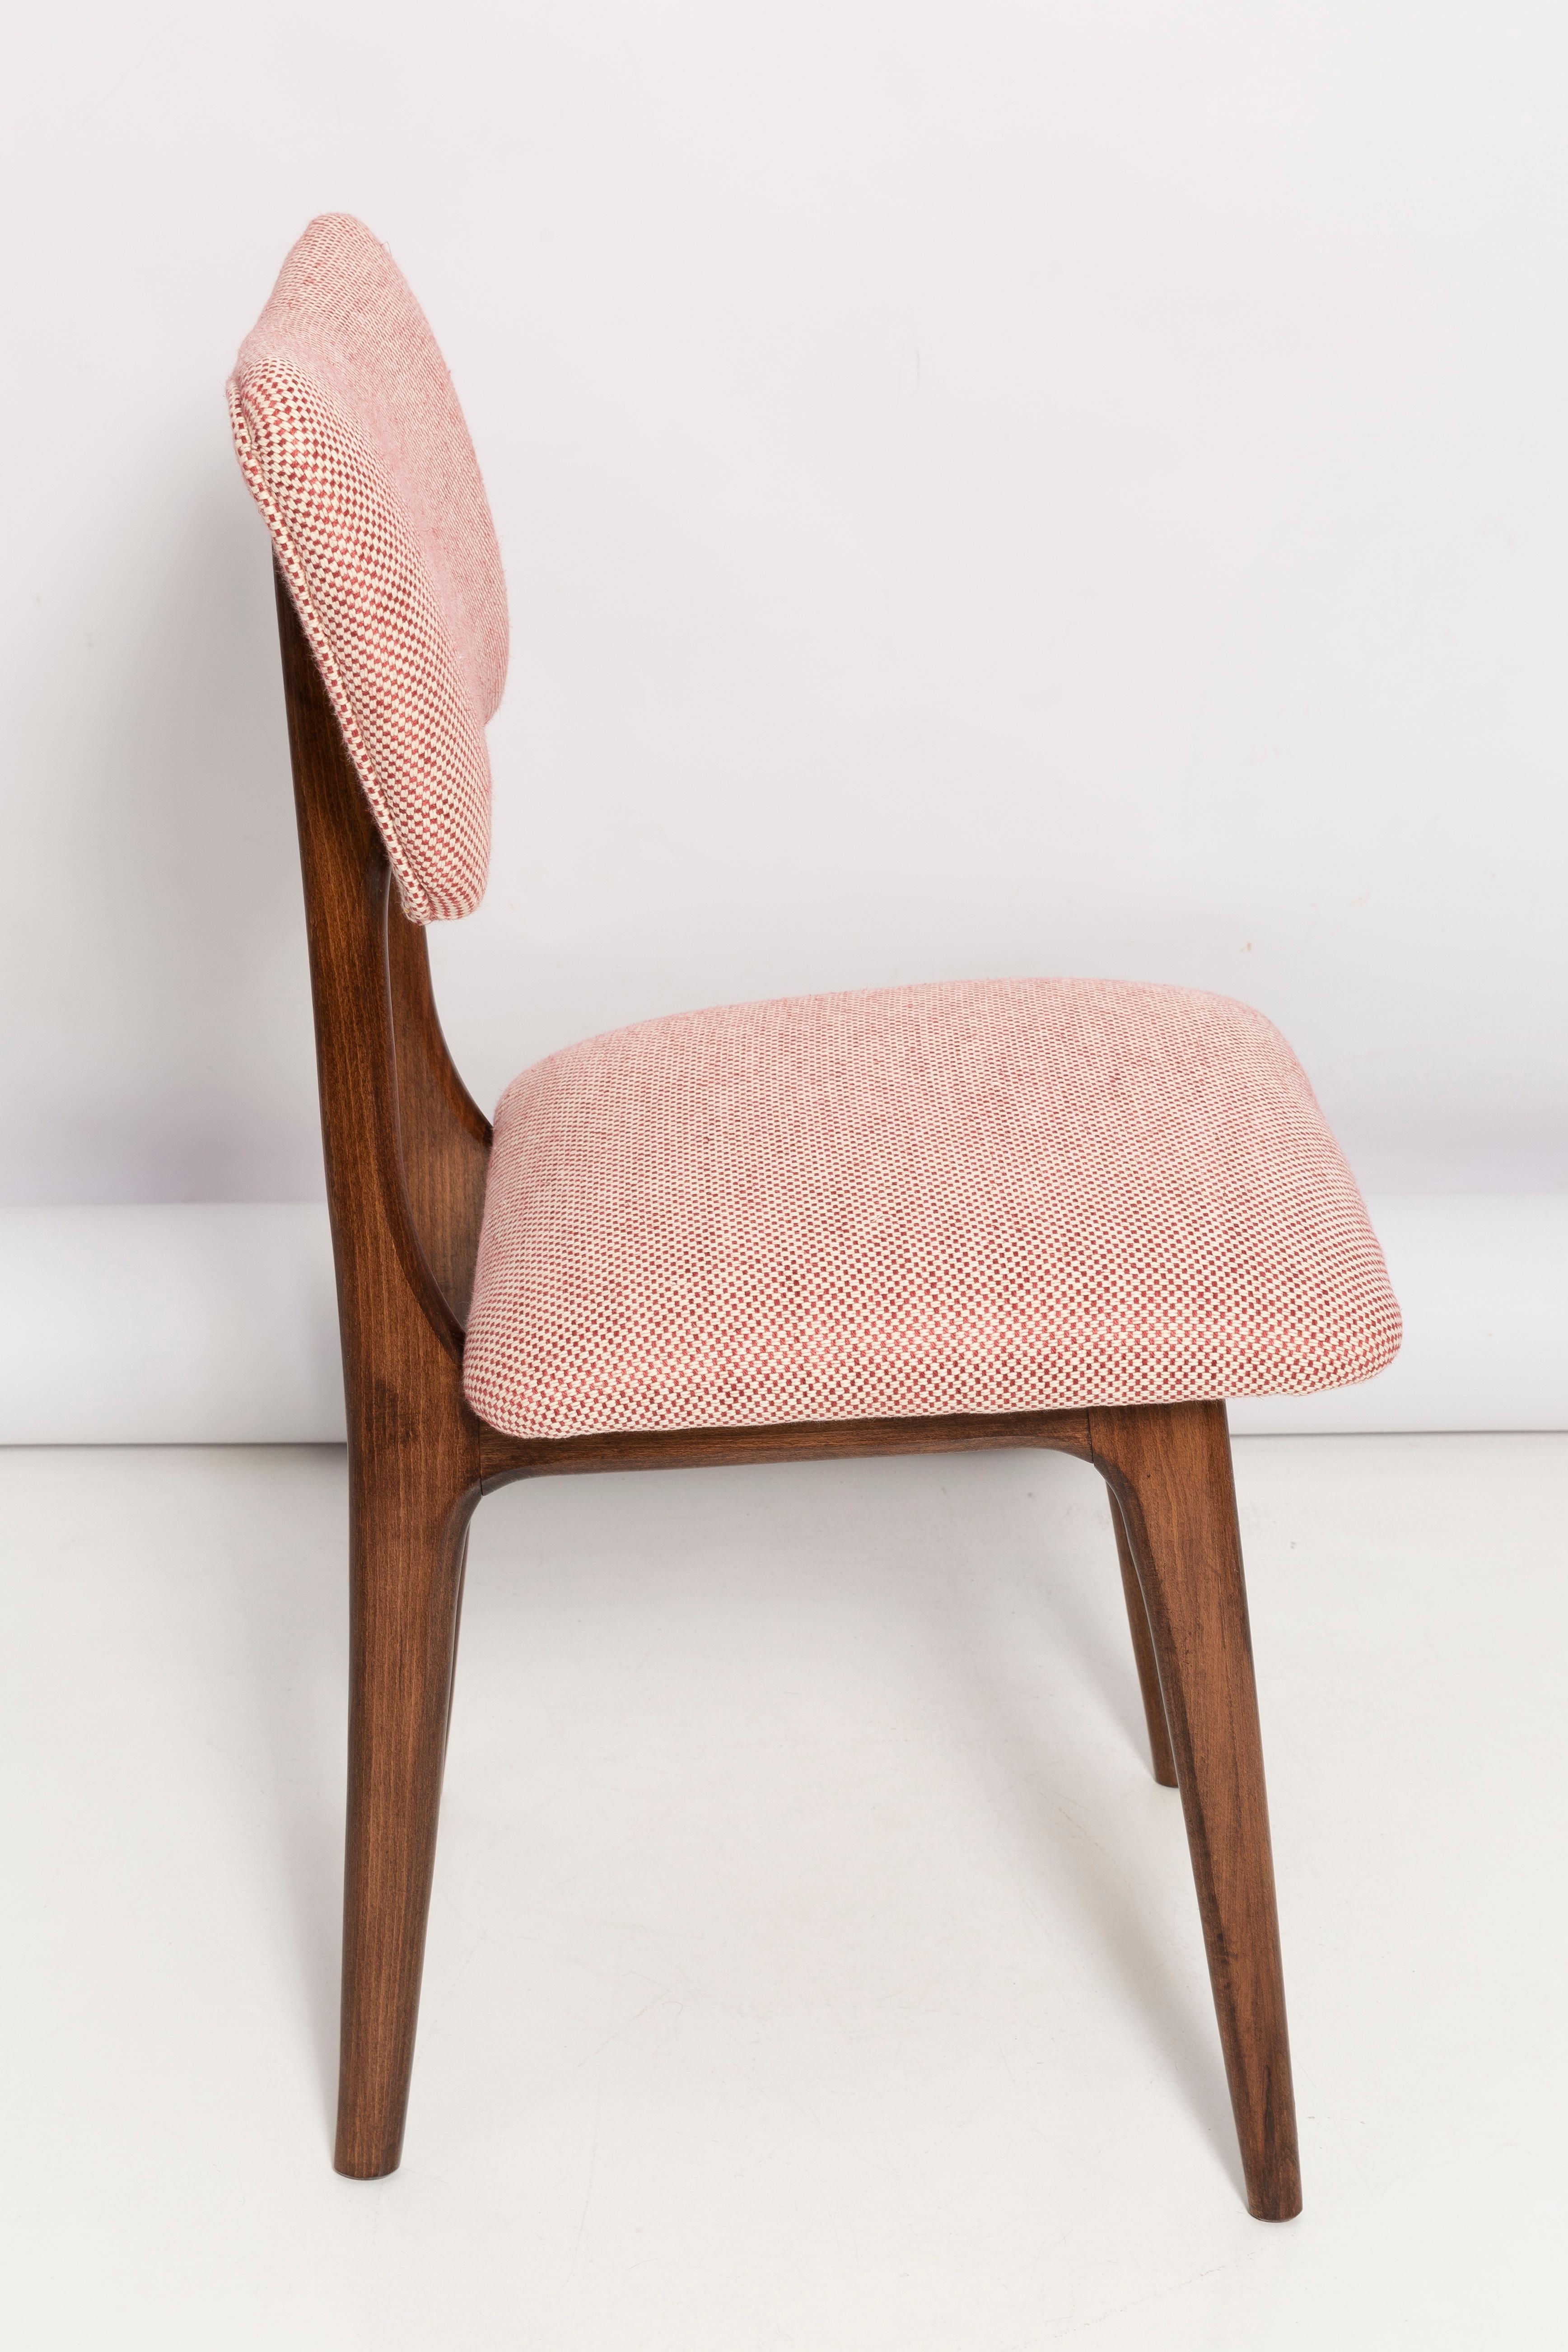 20th Century Mid-Century Butterfly Dining Chair, Peony Cotton, Poland, 1960s For Sale